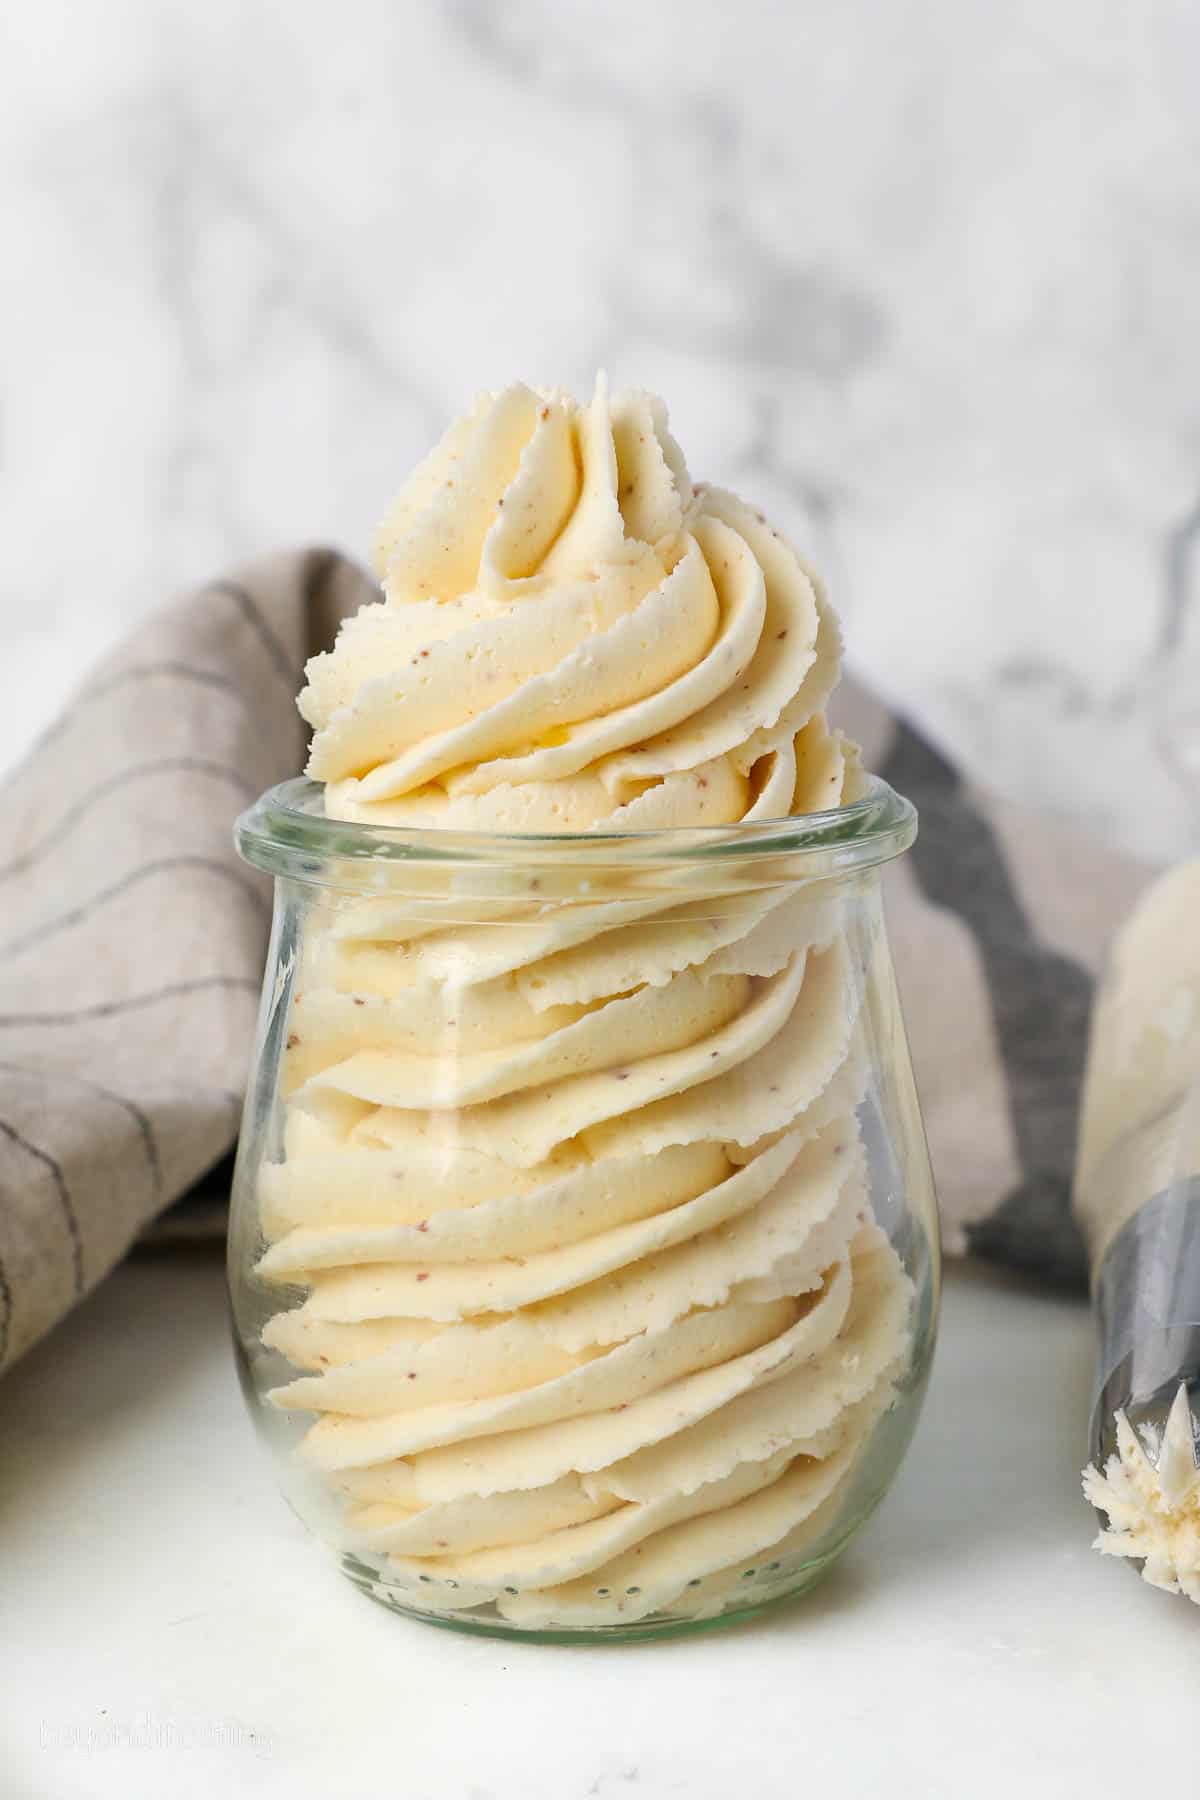 A glass jar filled with a piped swirl of brown butter frosting.